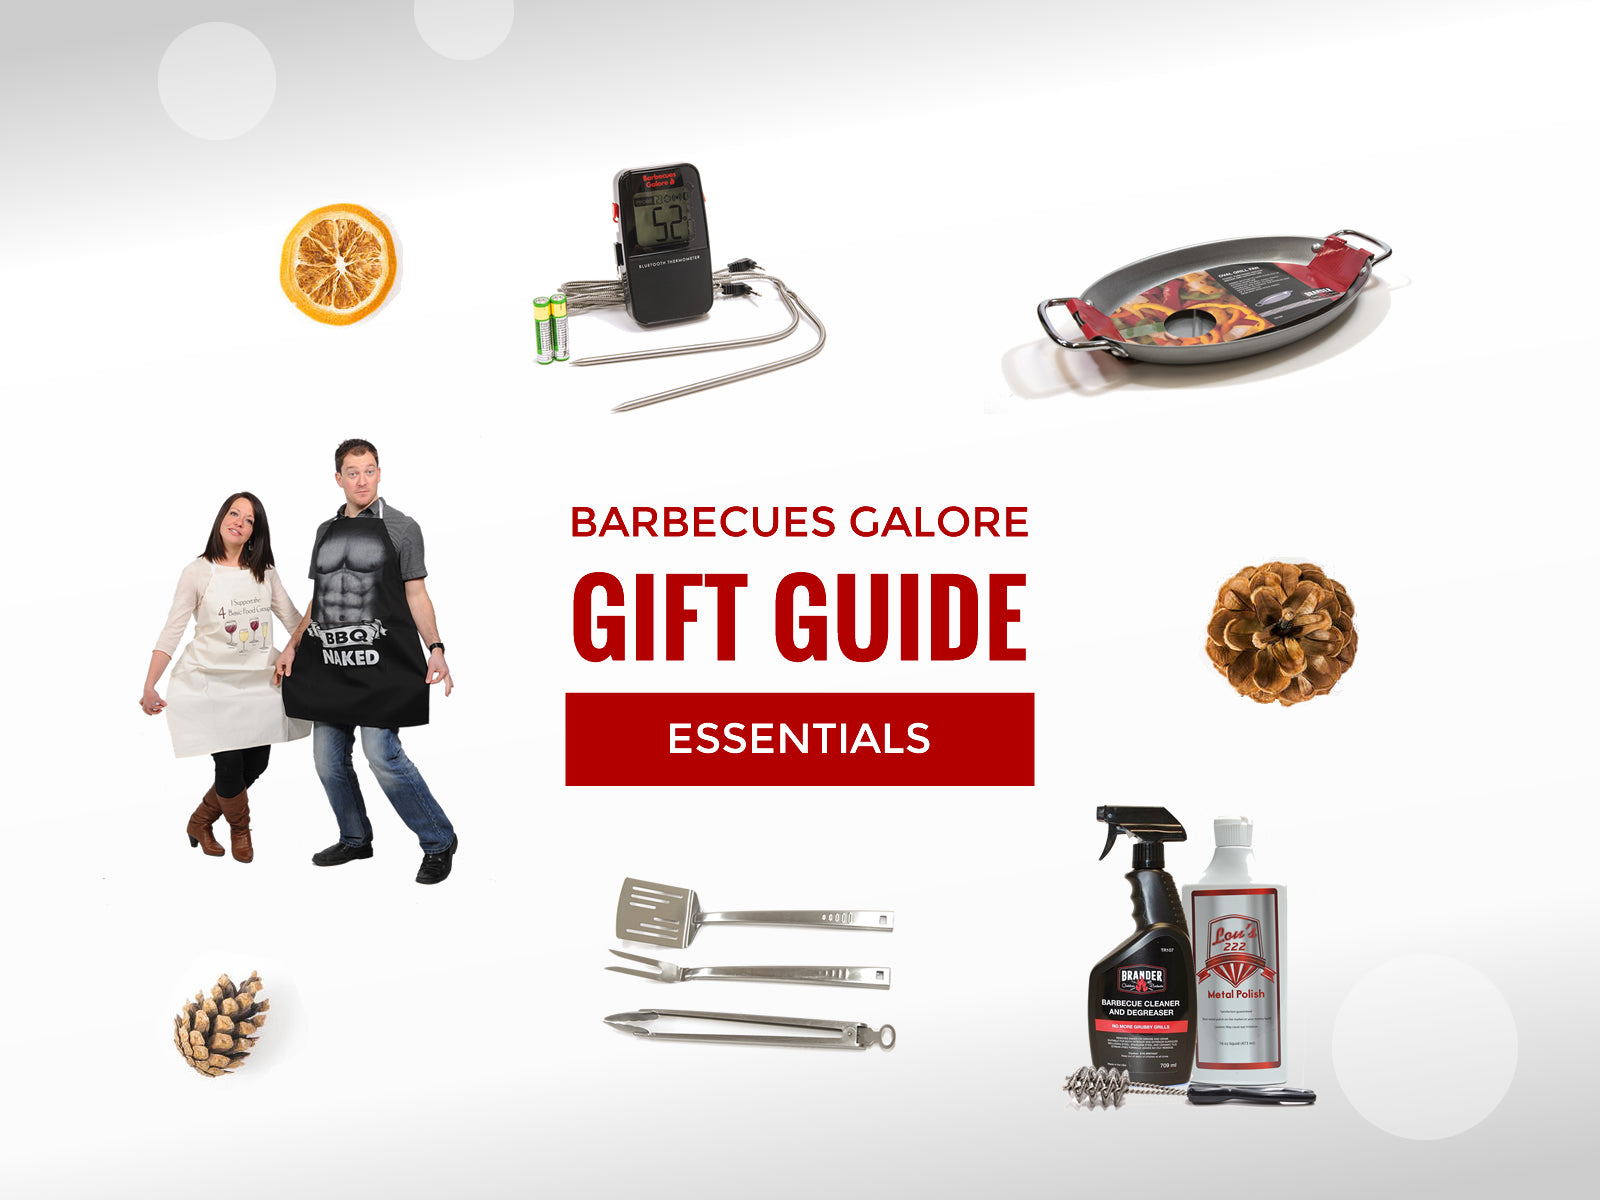 Barbecues Galore Gift Guide - Essential Grilling Tools